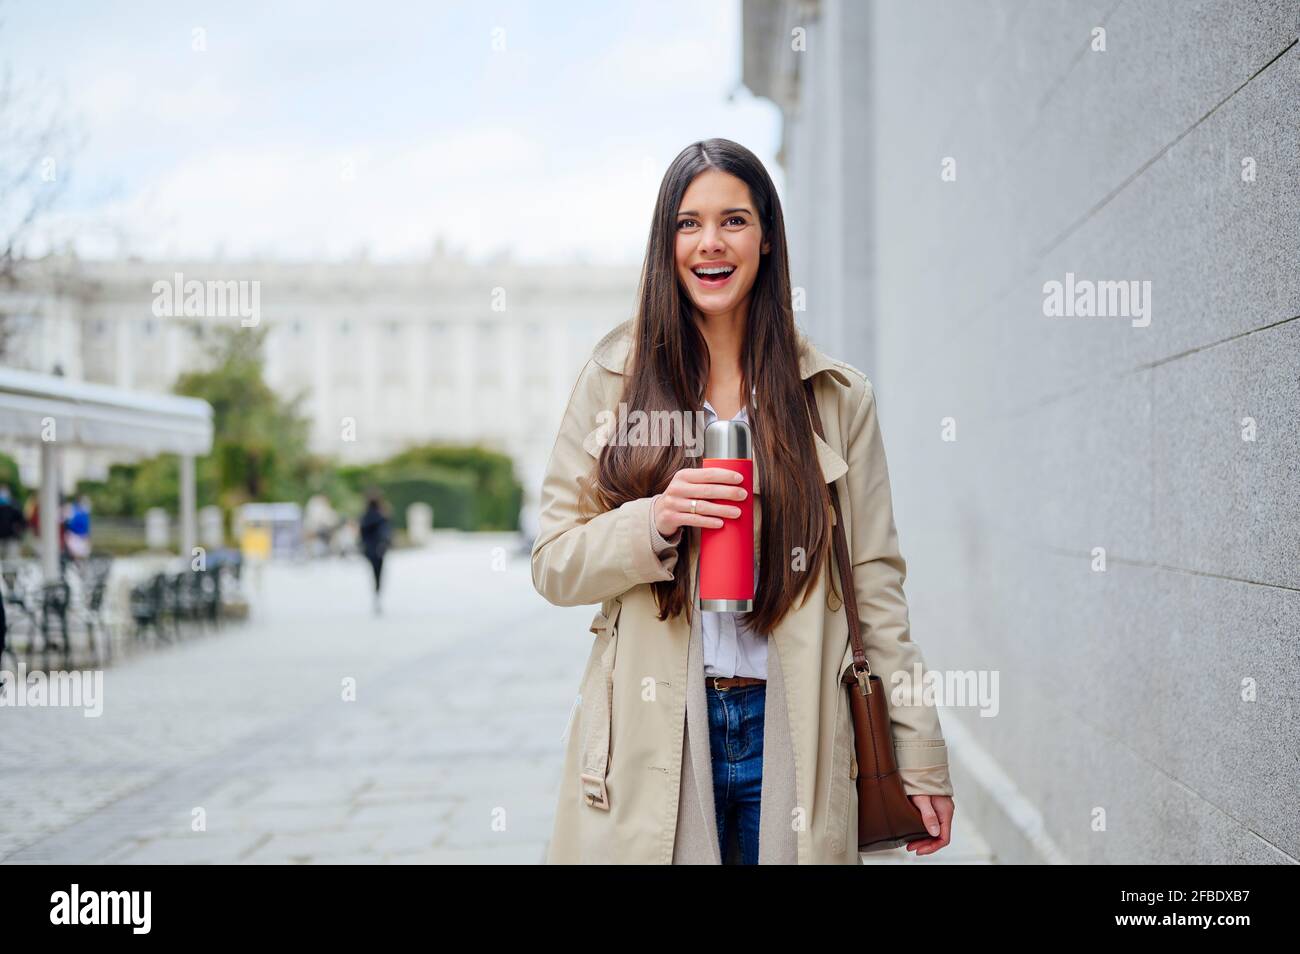 Laughing woman with insulated drink container standing near wall in city Stock Photo